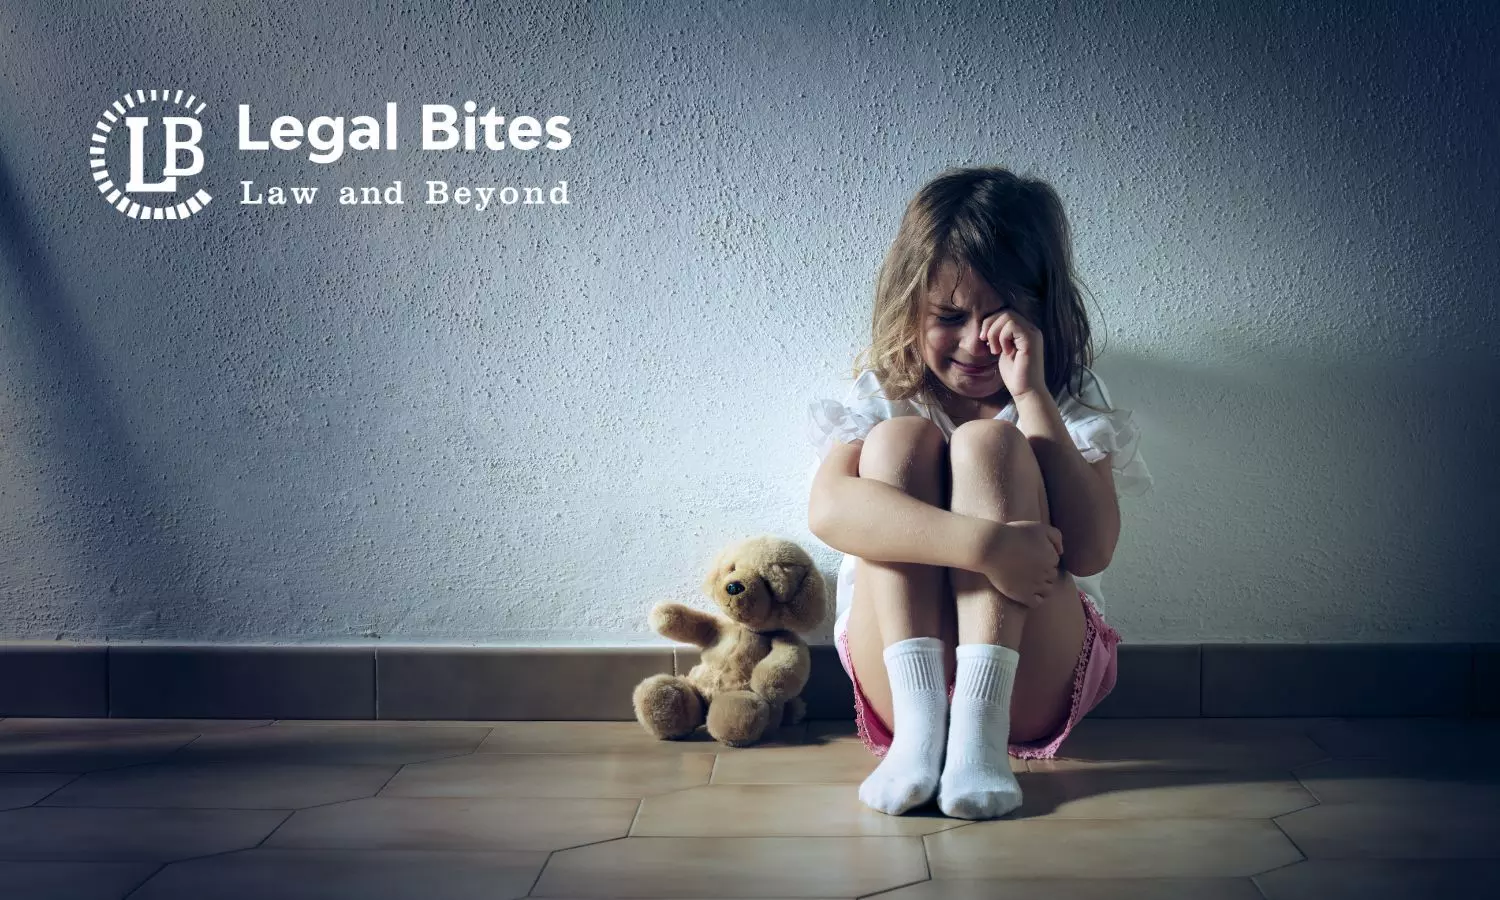 Stains on Childhood - An Overview of Child Sexual Abuse